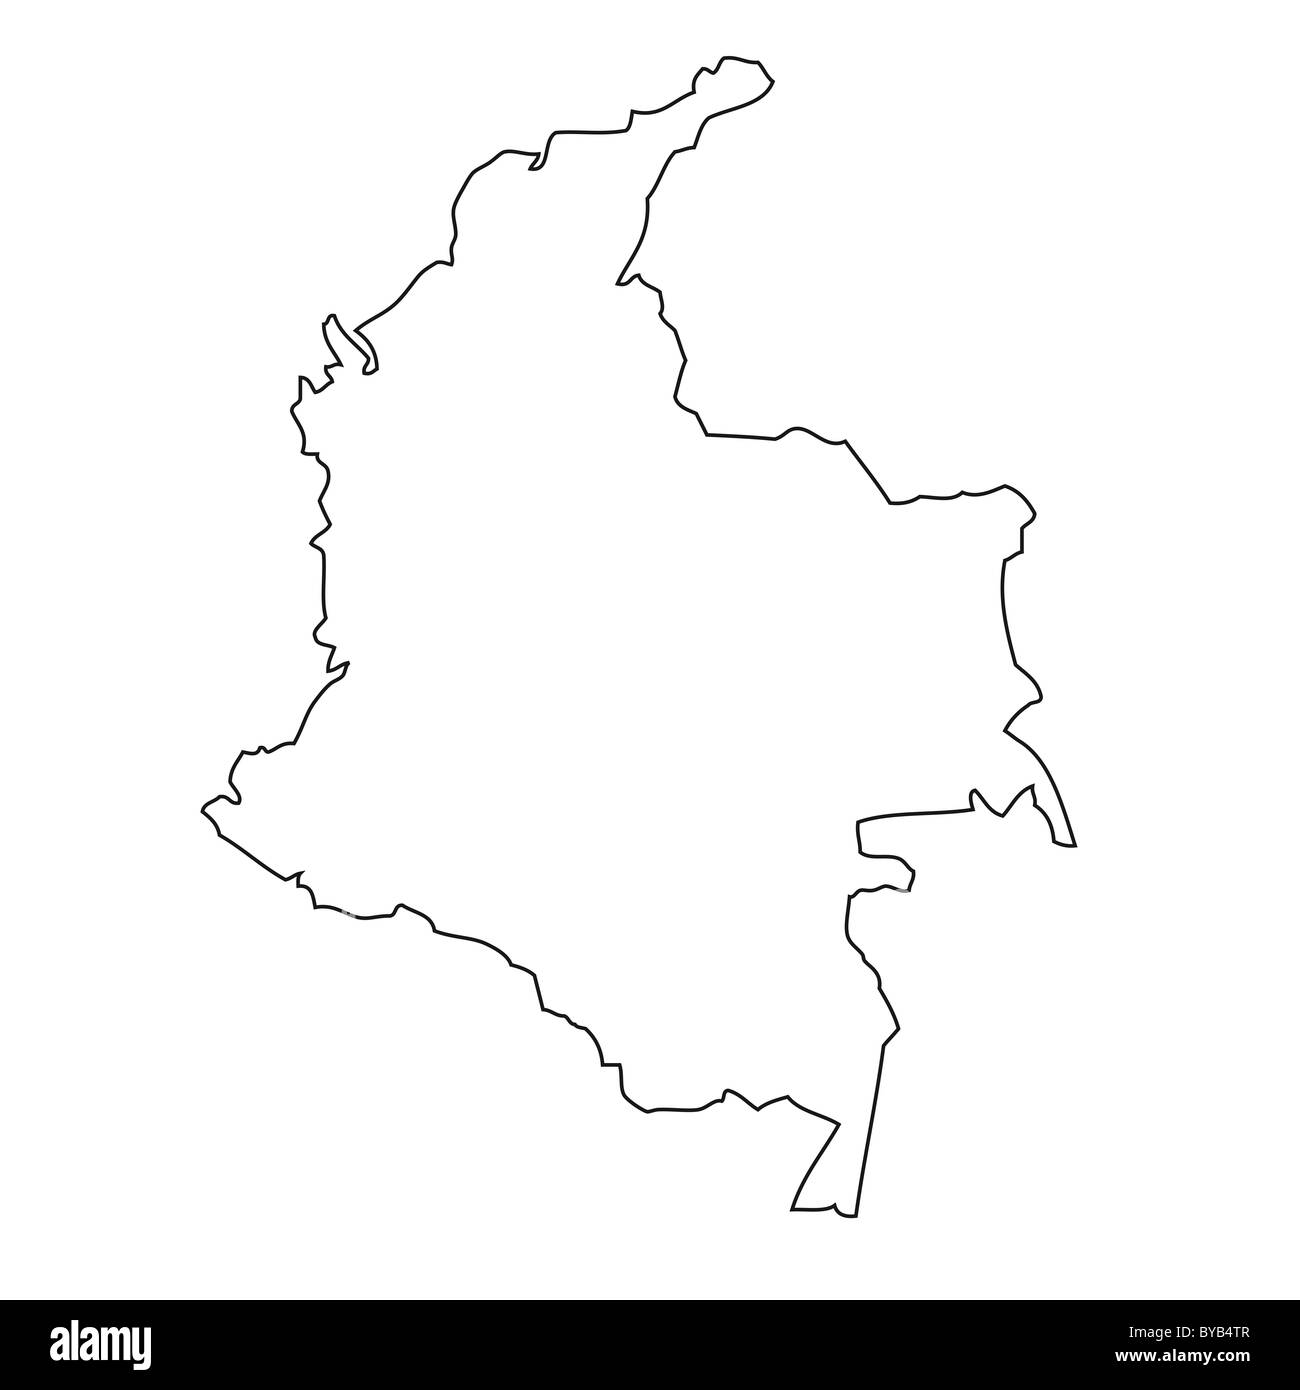 Outline, map of Colombia Stock Photo